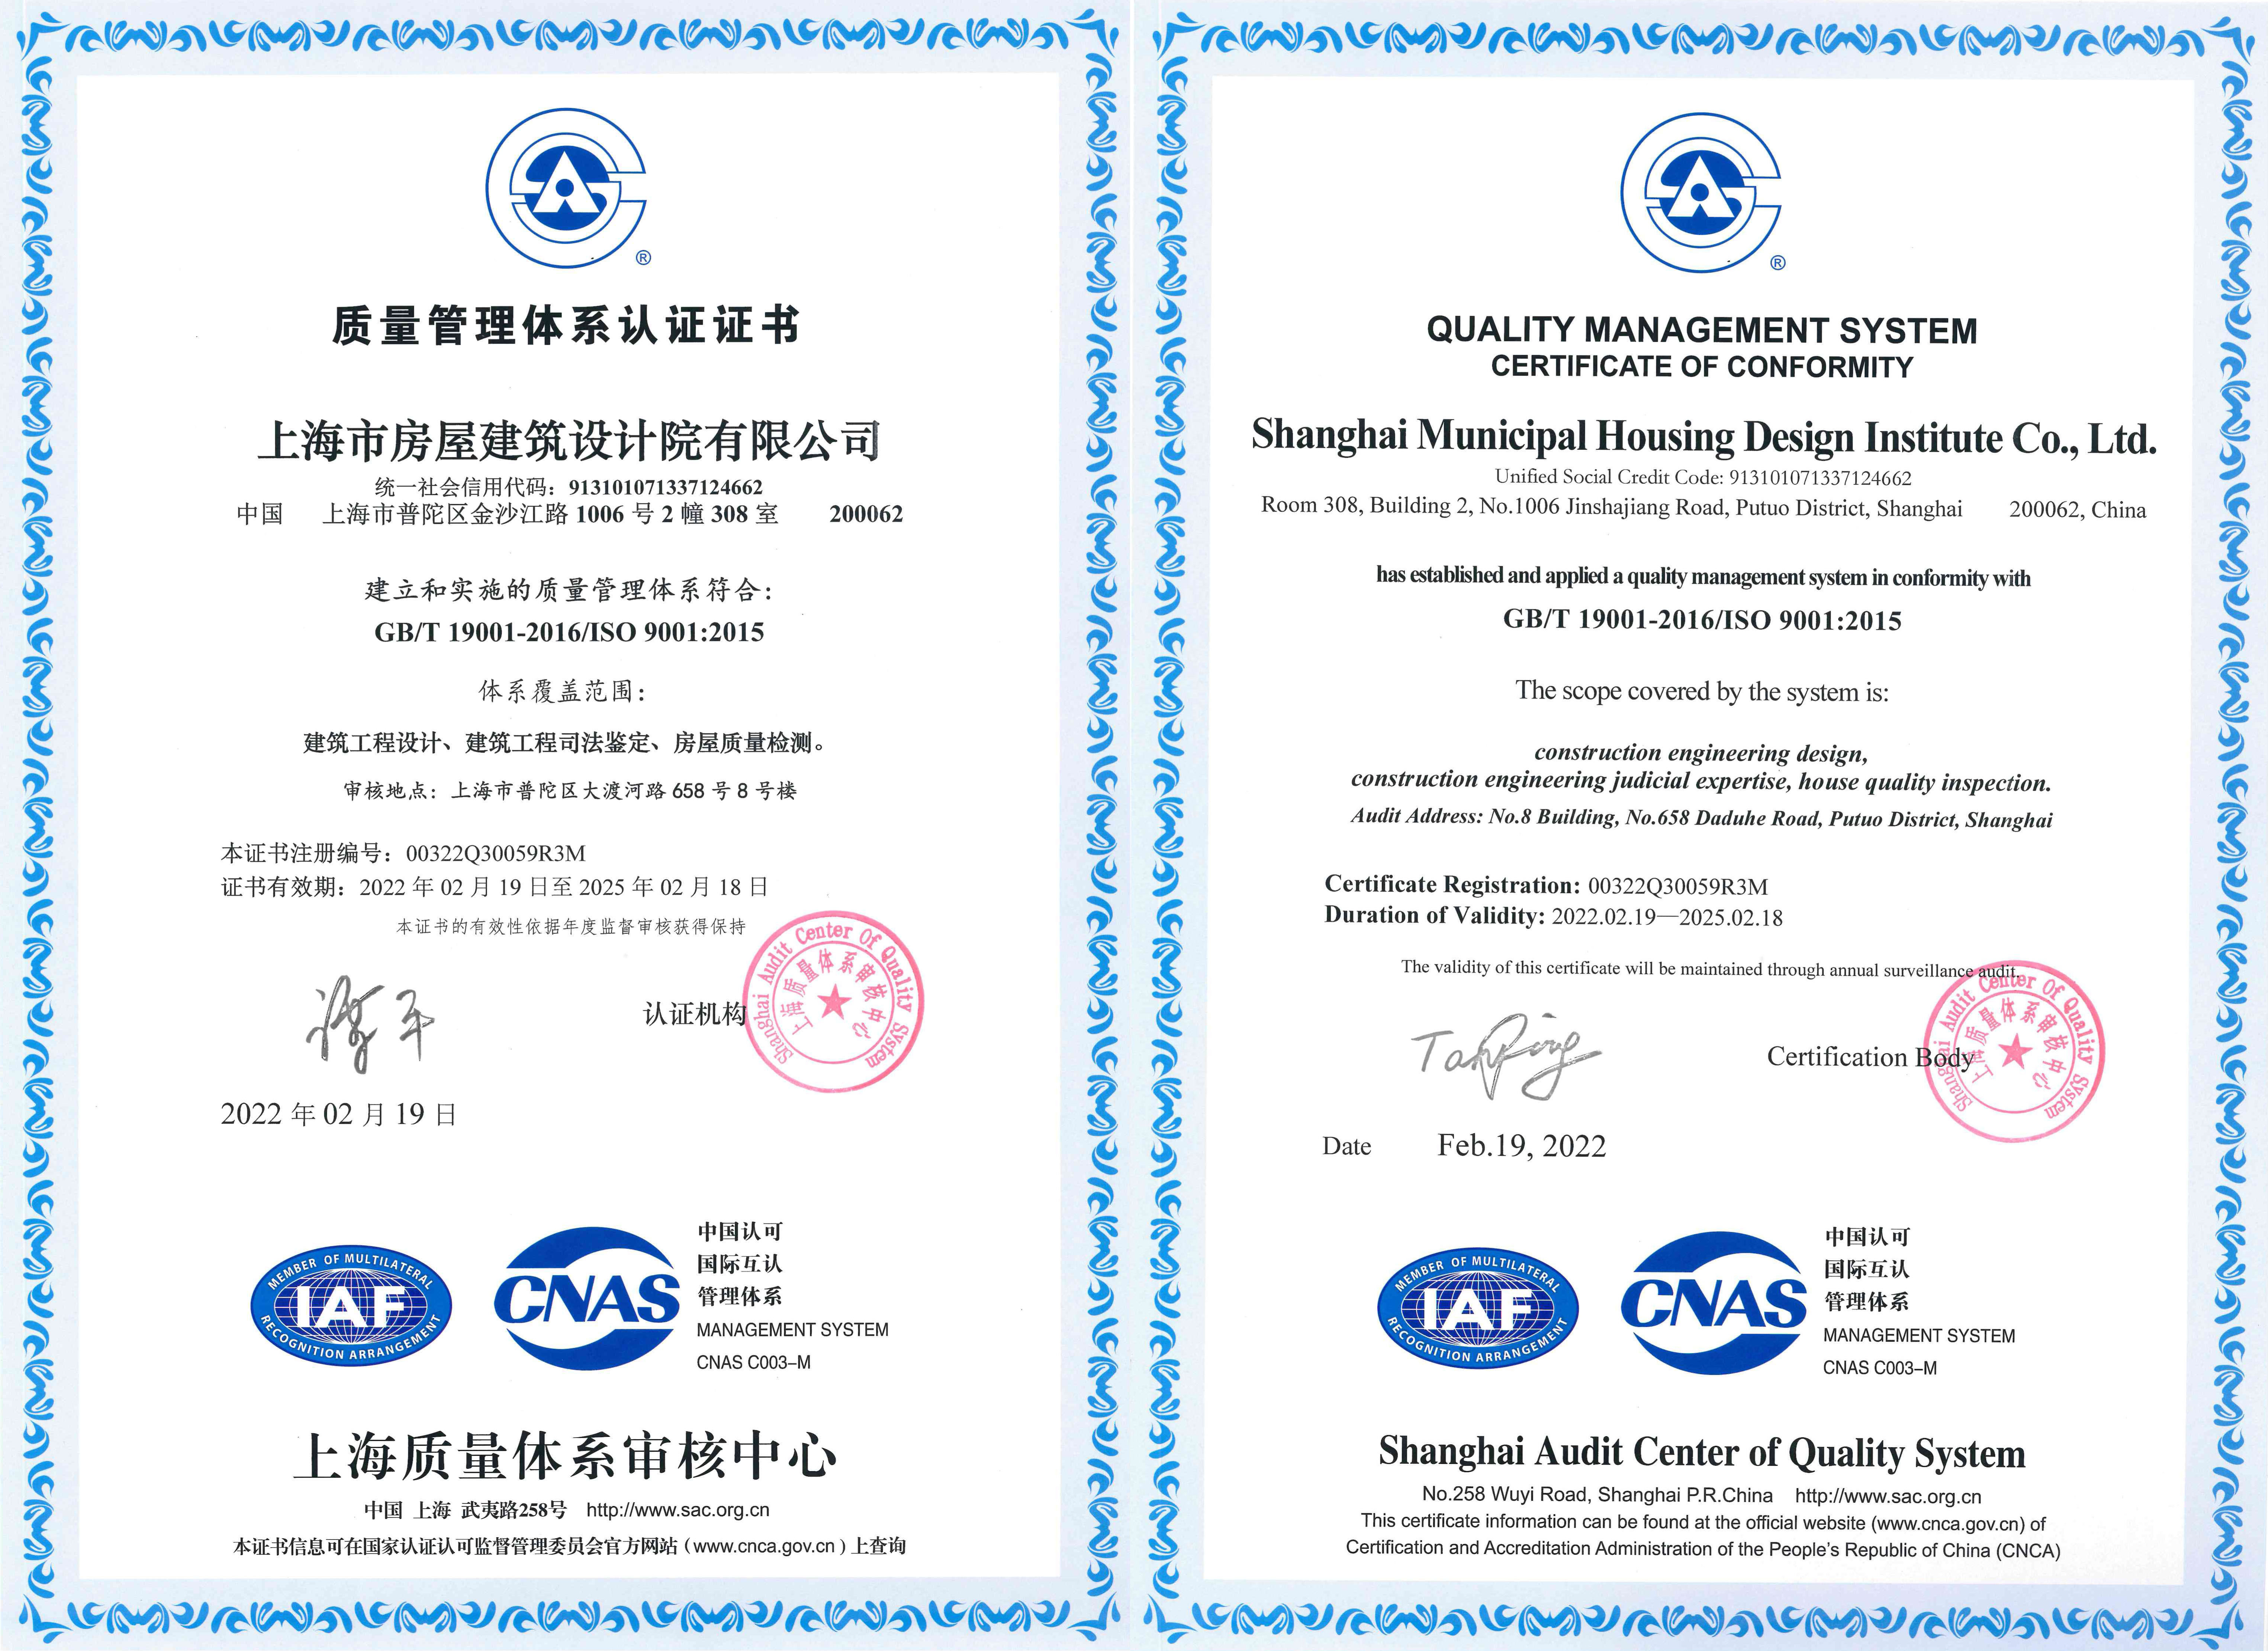 ISO9001-2015 Quality Management System Certificate Certificate